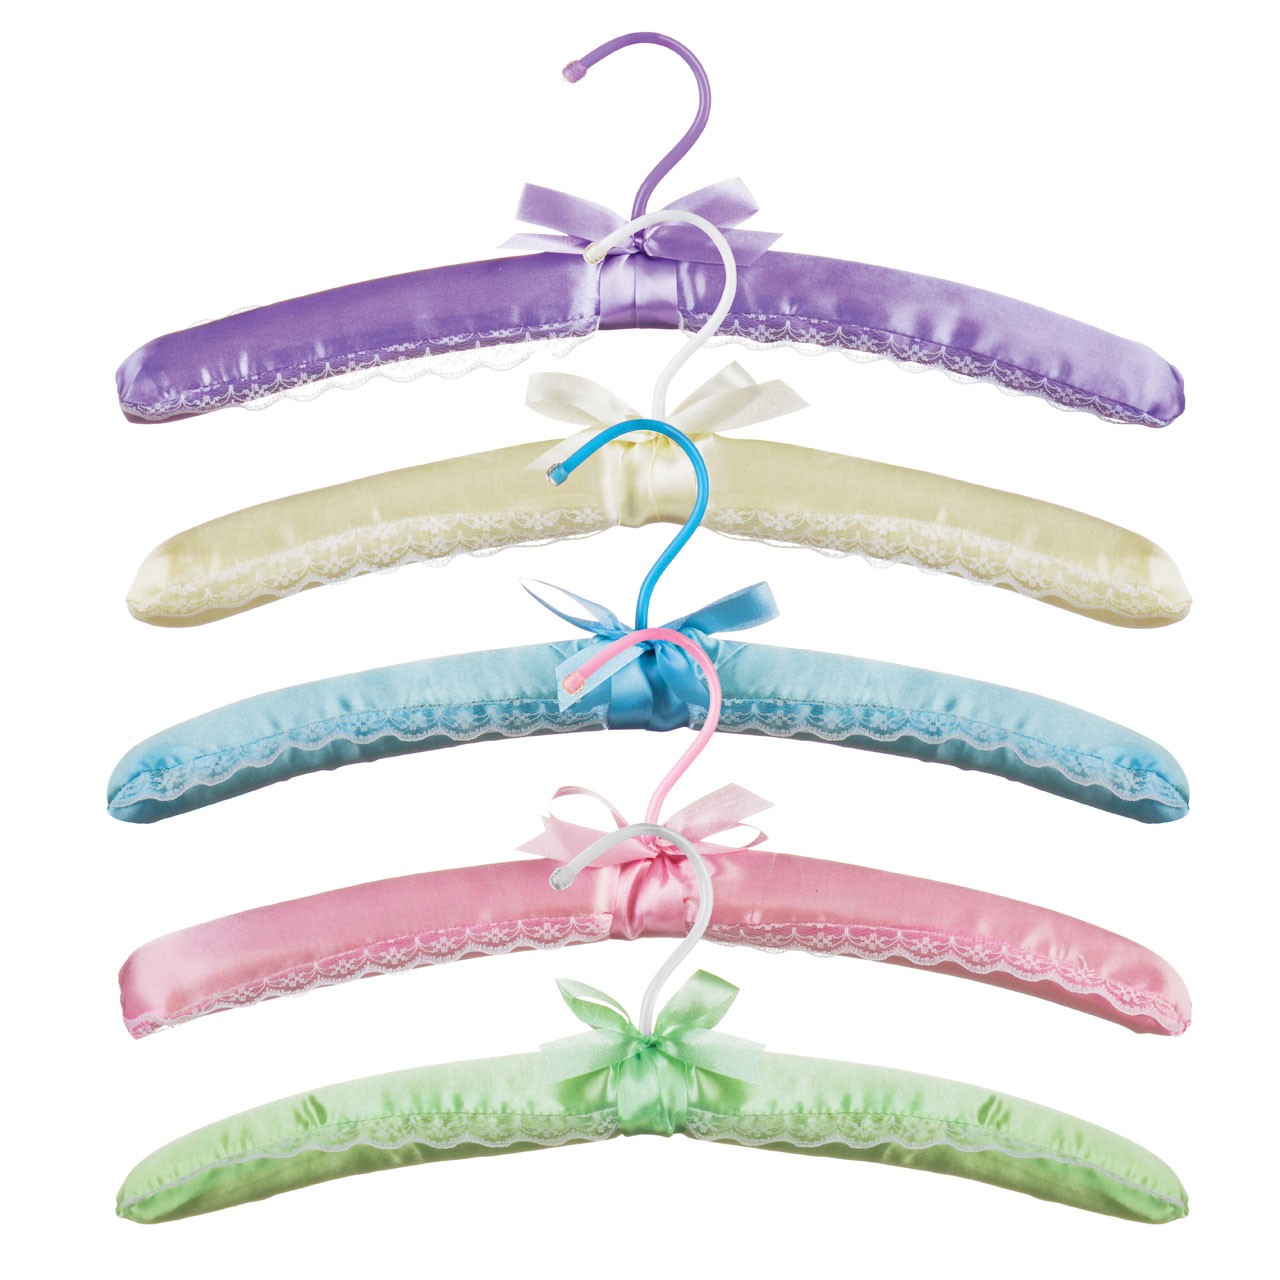 Clothes Hangers with Lace - Multi-Colour, Set of 5